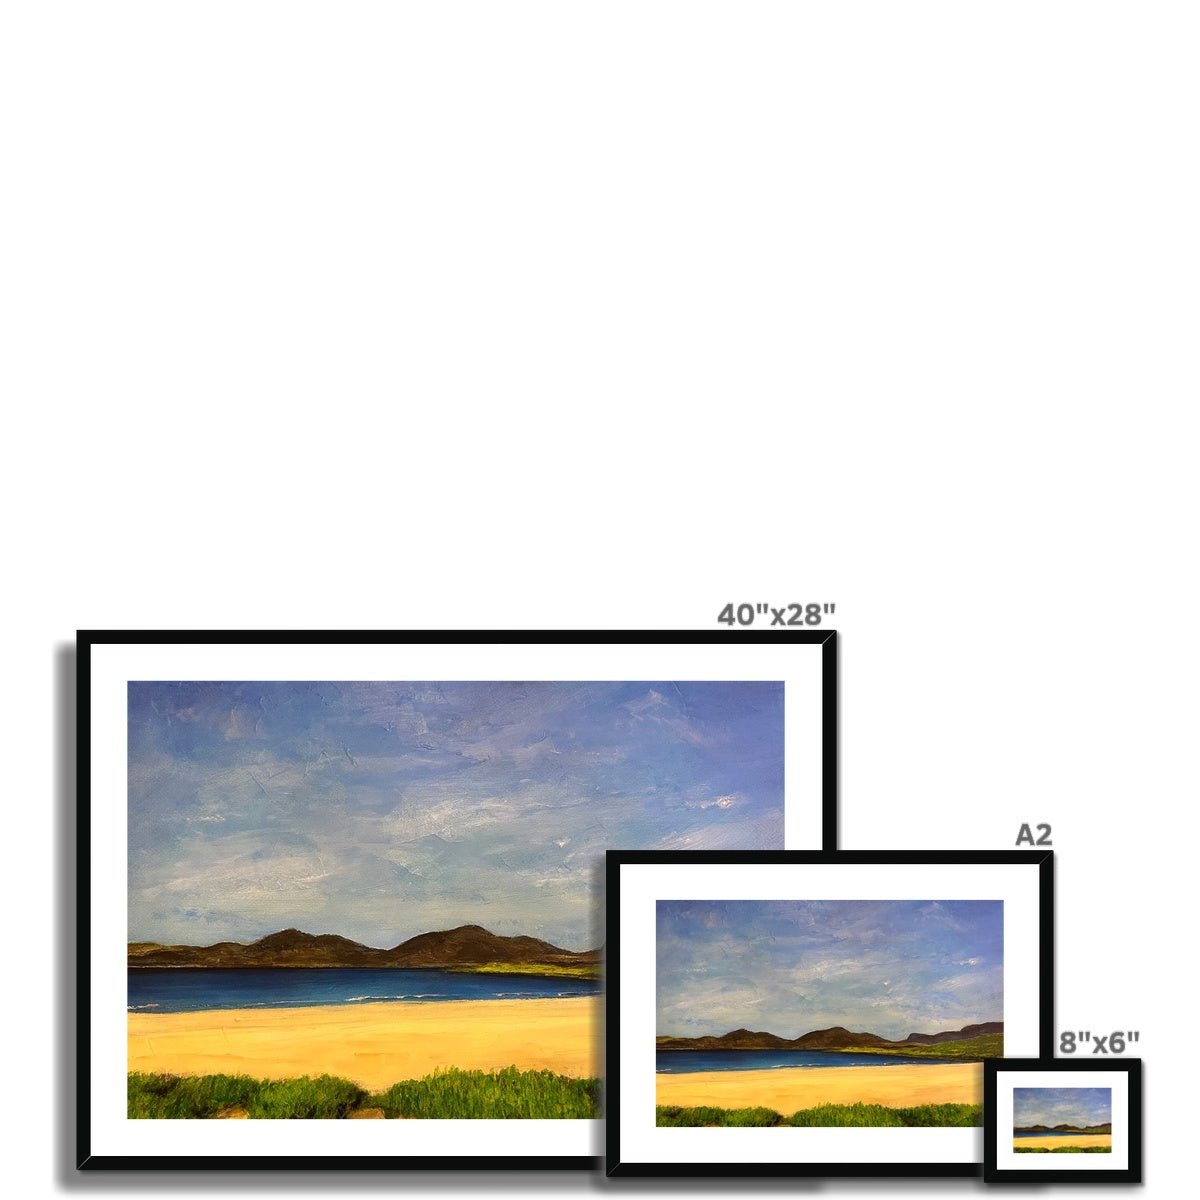 Luskentyre Beach Harris Painting | Framed & Mounted Prints From Scotland-Framed & Mounted Prints-Hebridean Islands Art Gallery-Paintings, Prints, Homeware, Art Gifts From Scotland By Scottish Artist Kevin Hunter